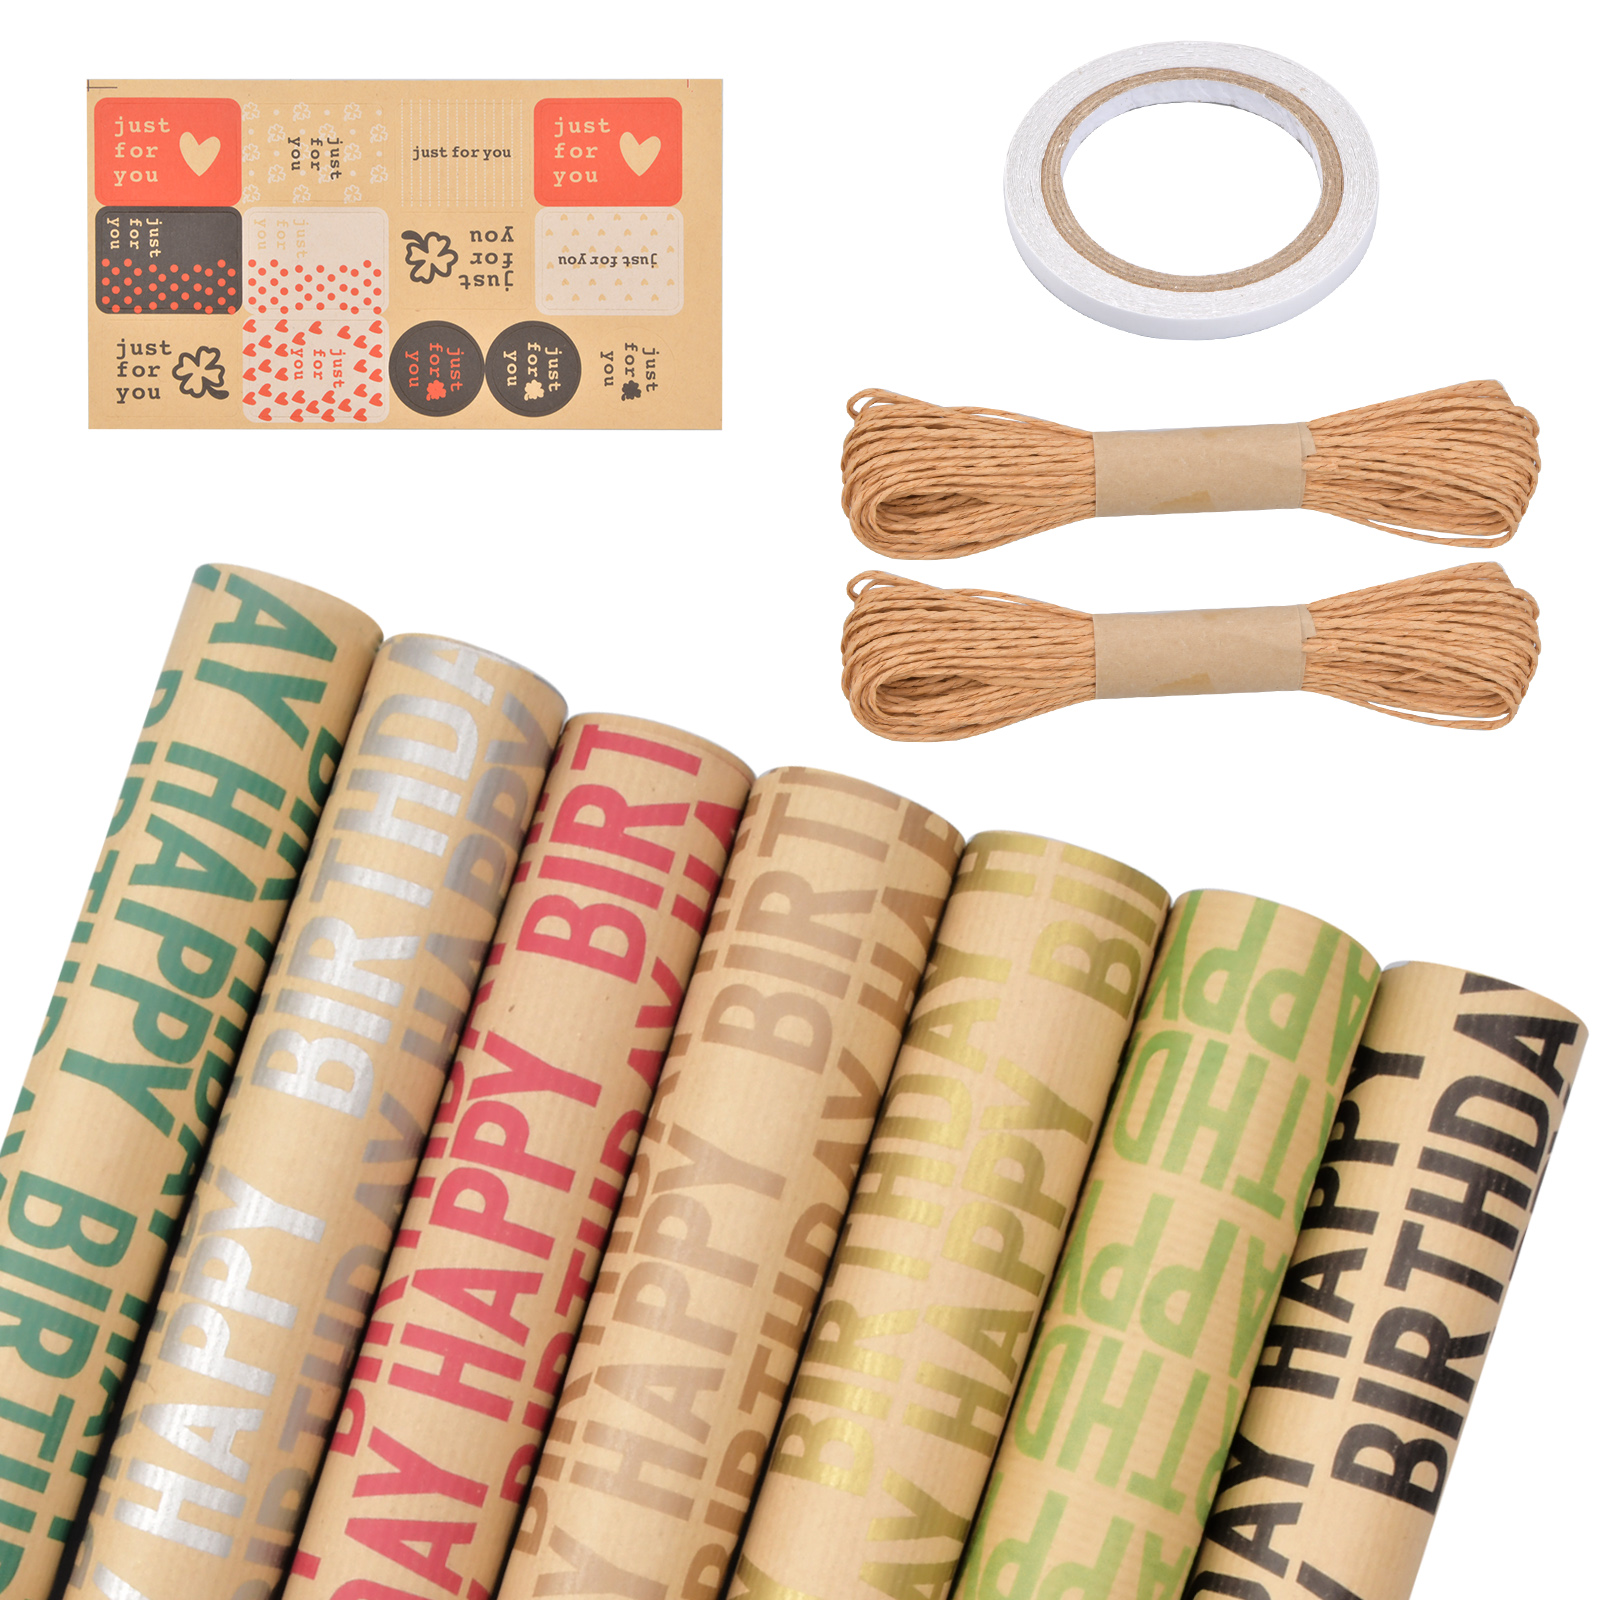 10/20/30m Brown Kraft Paper Roll for Wedding Birthday Party Gift